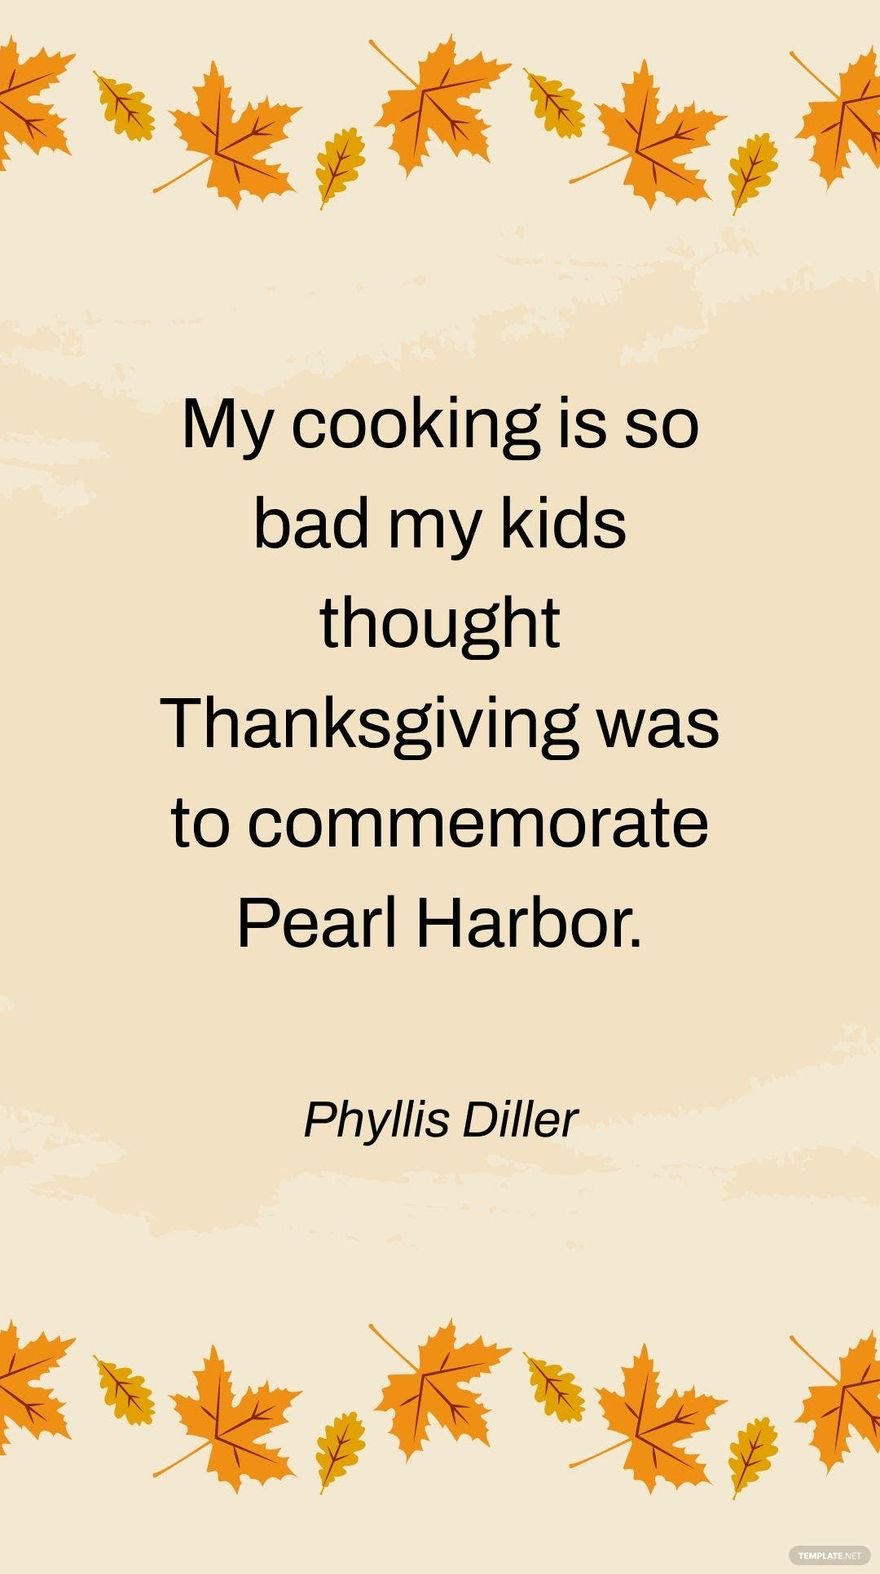 Phyllis Diller - My cooking is so bad my kids thought Thanksgiving was to commemorate Pearl Harbor. in JPG